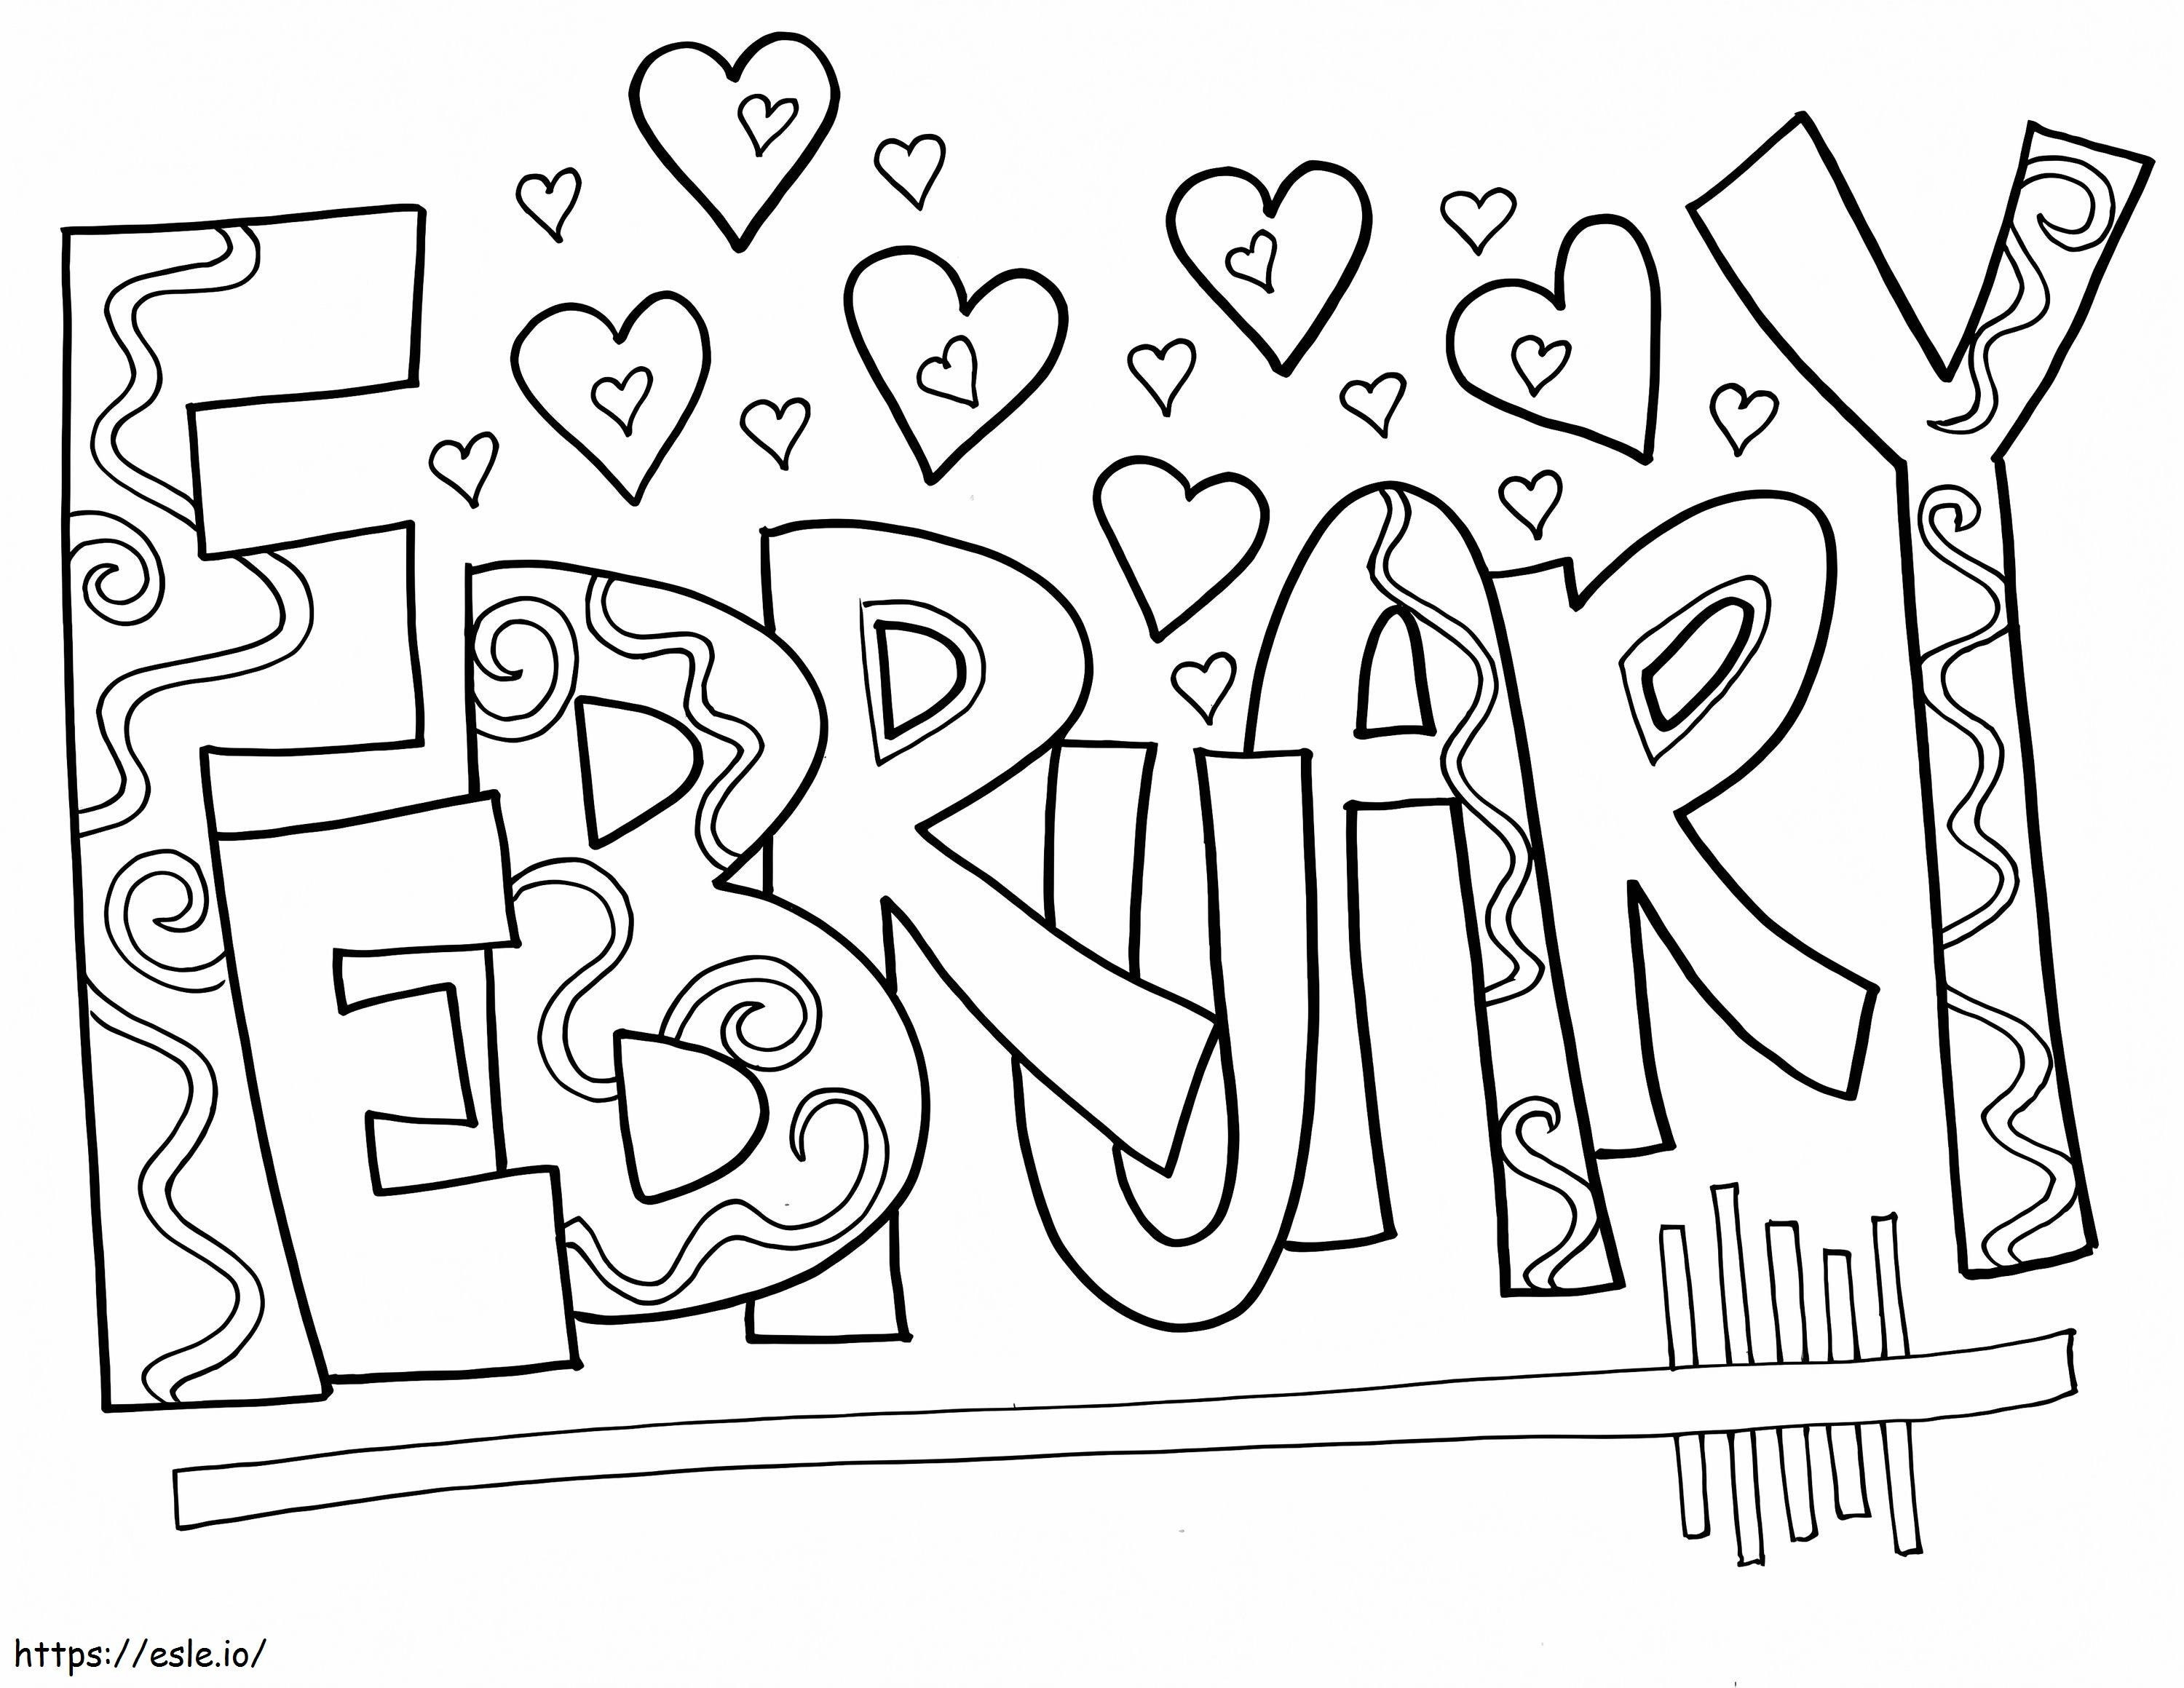 February Coloring Page 1 coloring page